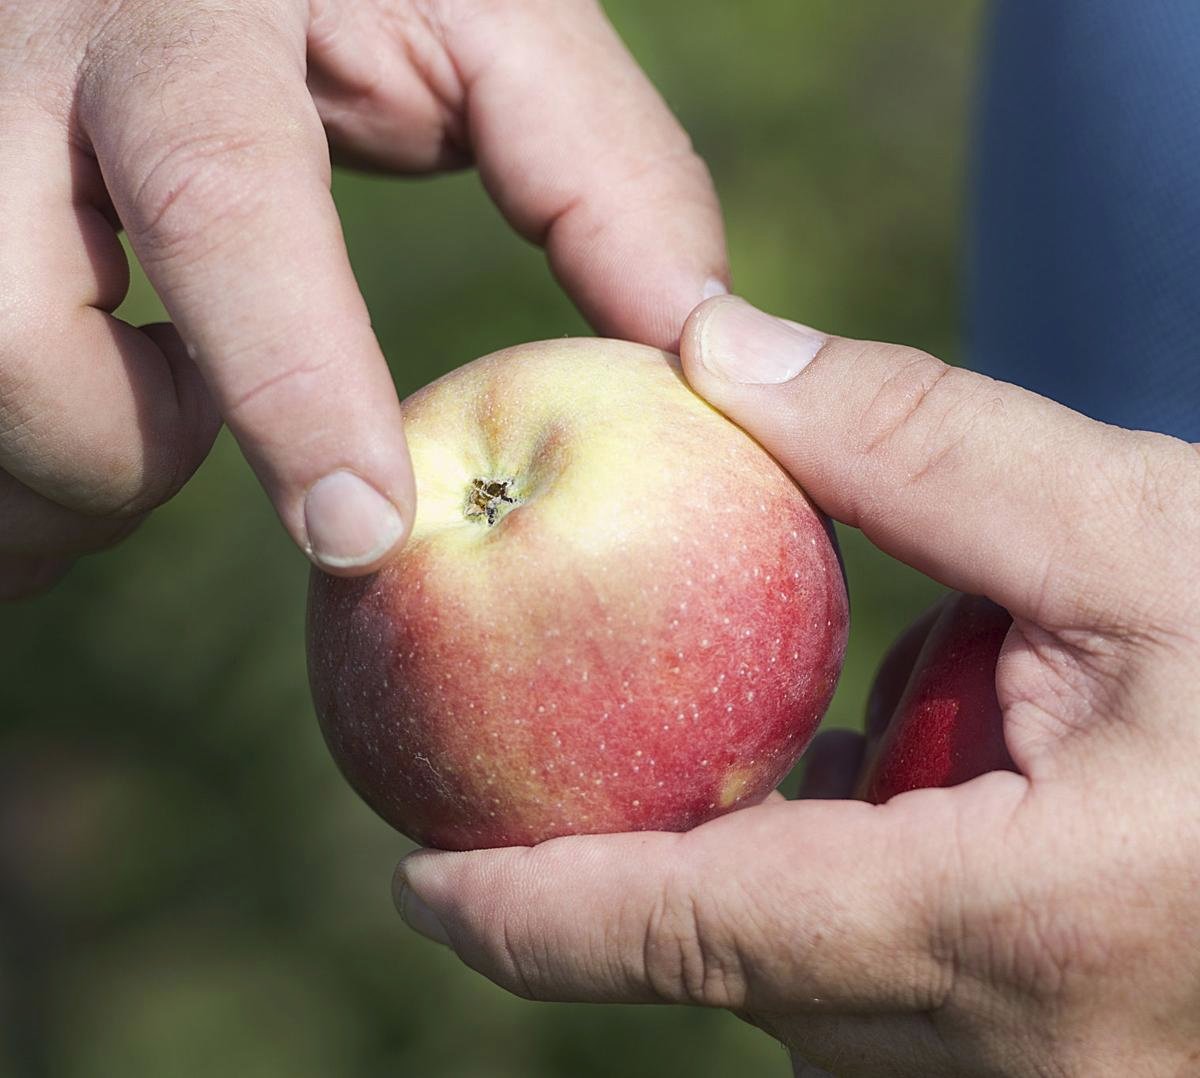 After about ten years, the little tree produced its first apple. He took a bite and exclaimed, "Well that's the best apple in the world!"Marked with gold and strawberry stripes, rather than deep red, he named it the Hawkeye Apple.